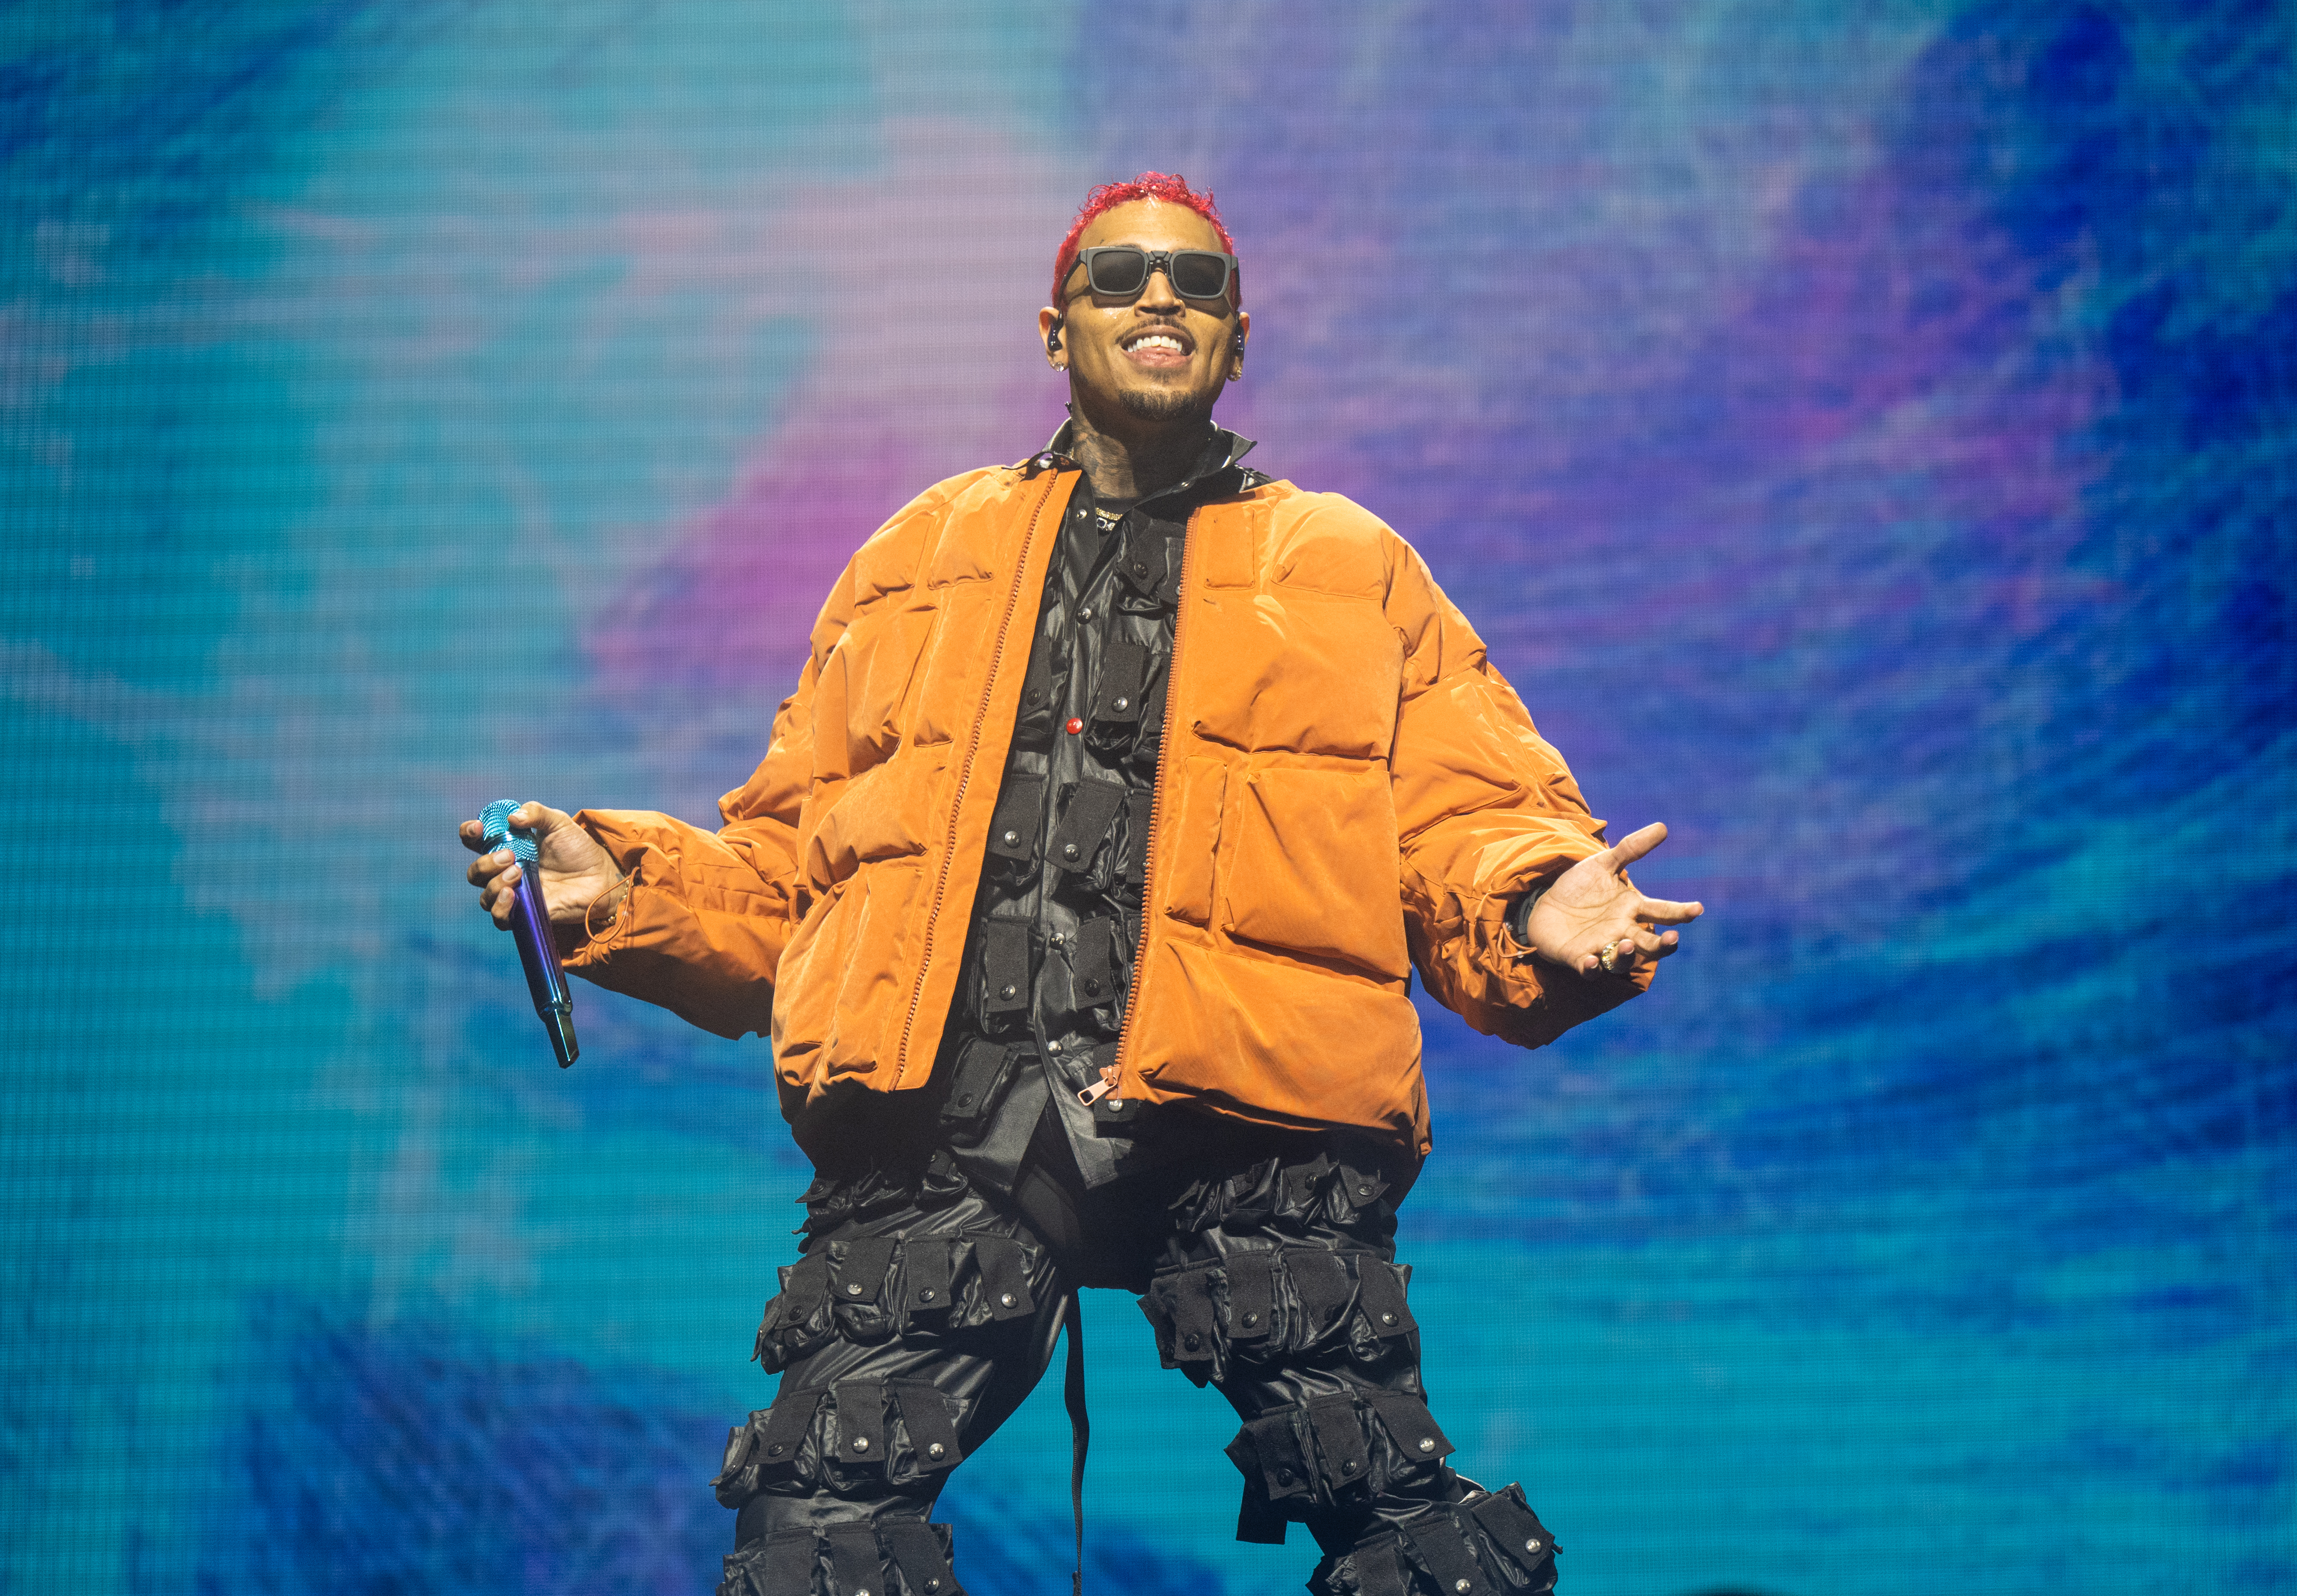 Chris Brown Gives Fan Steamy Lap Dance, Her BF Ends Their Relationship